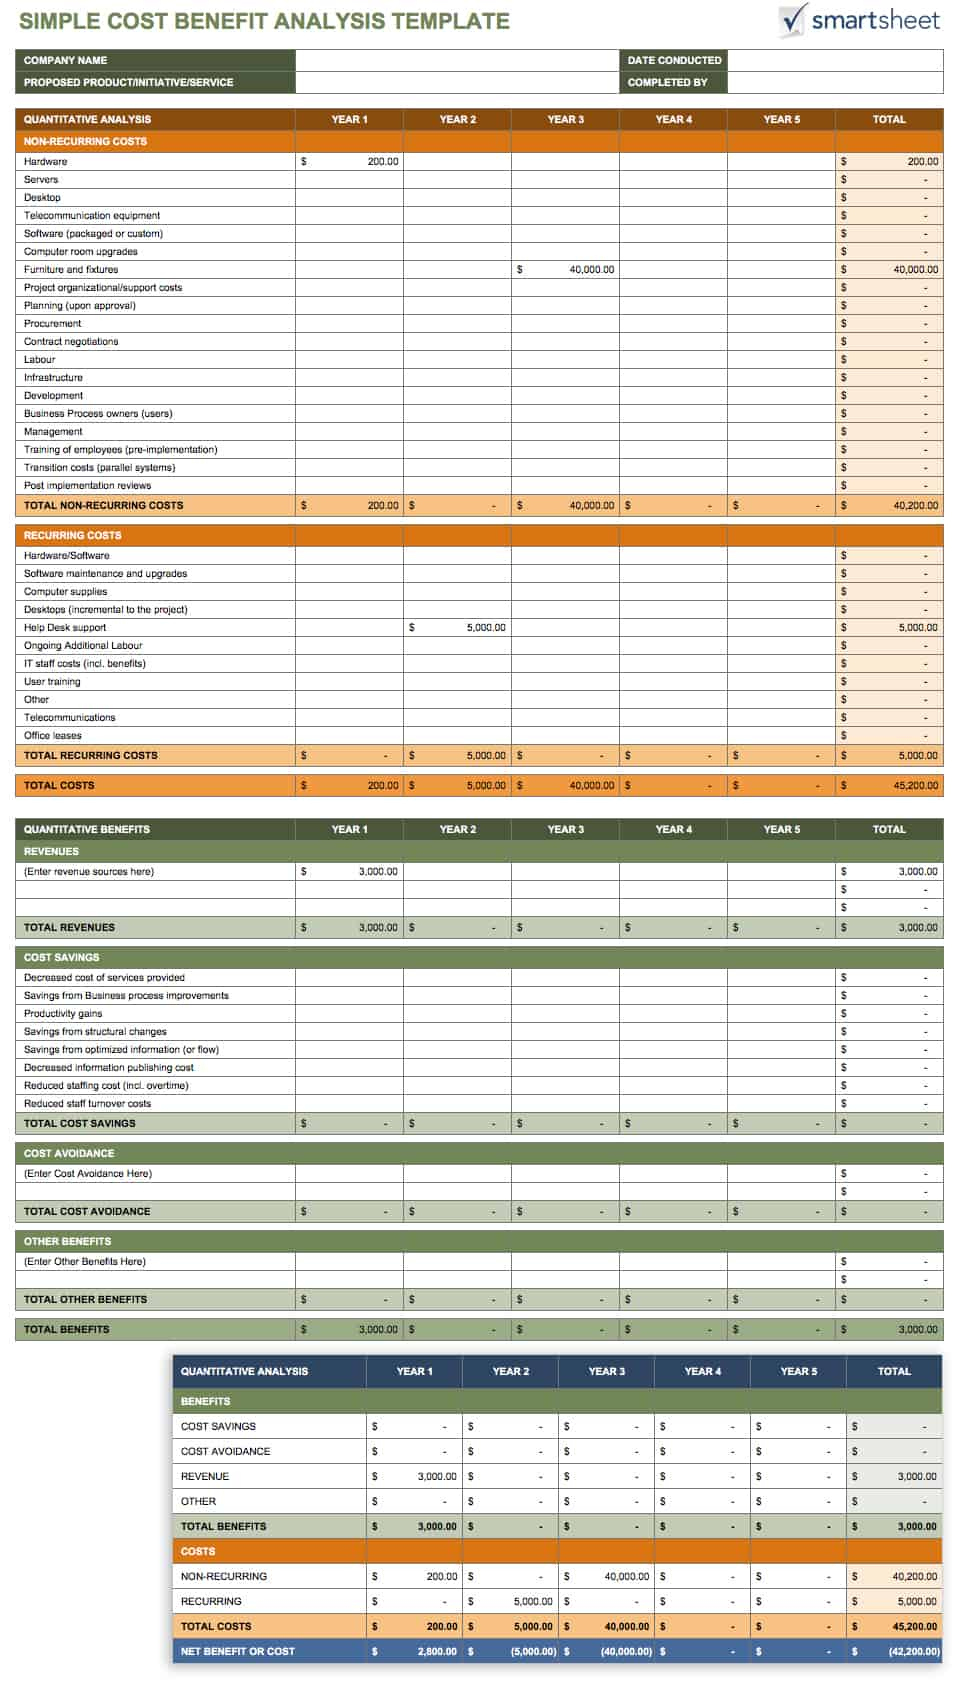 Free Cost Benefit Analysis Templates Smartsheet pertaining to Free Cost Savings Report Template